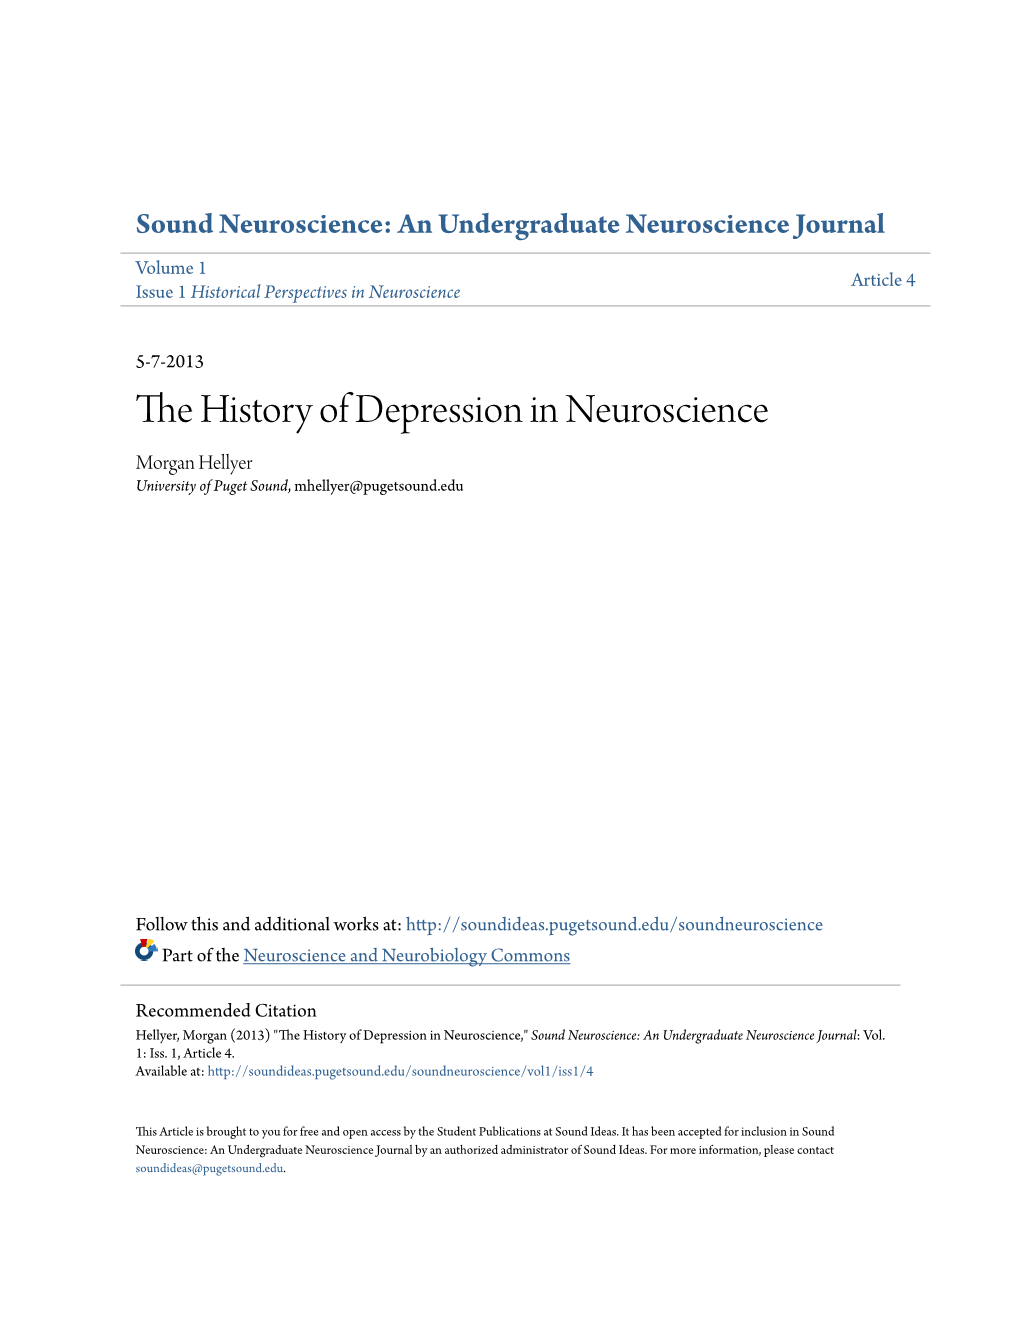 The History of Depression in Neuroscience